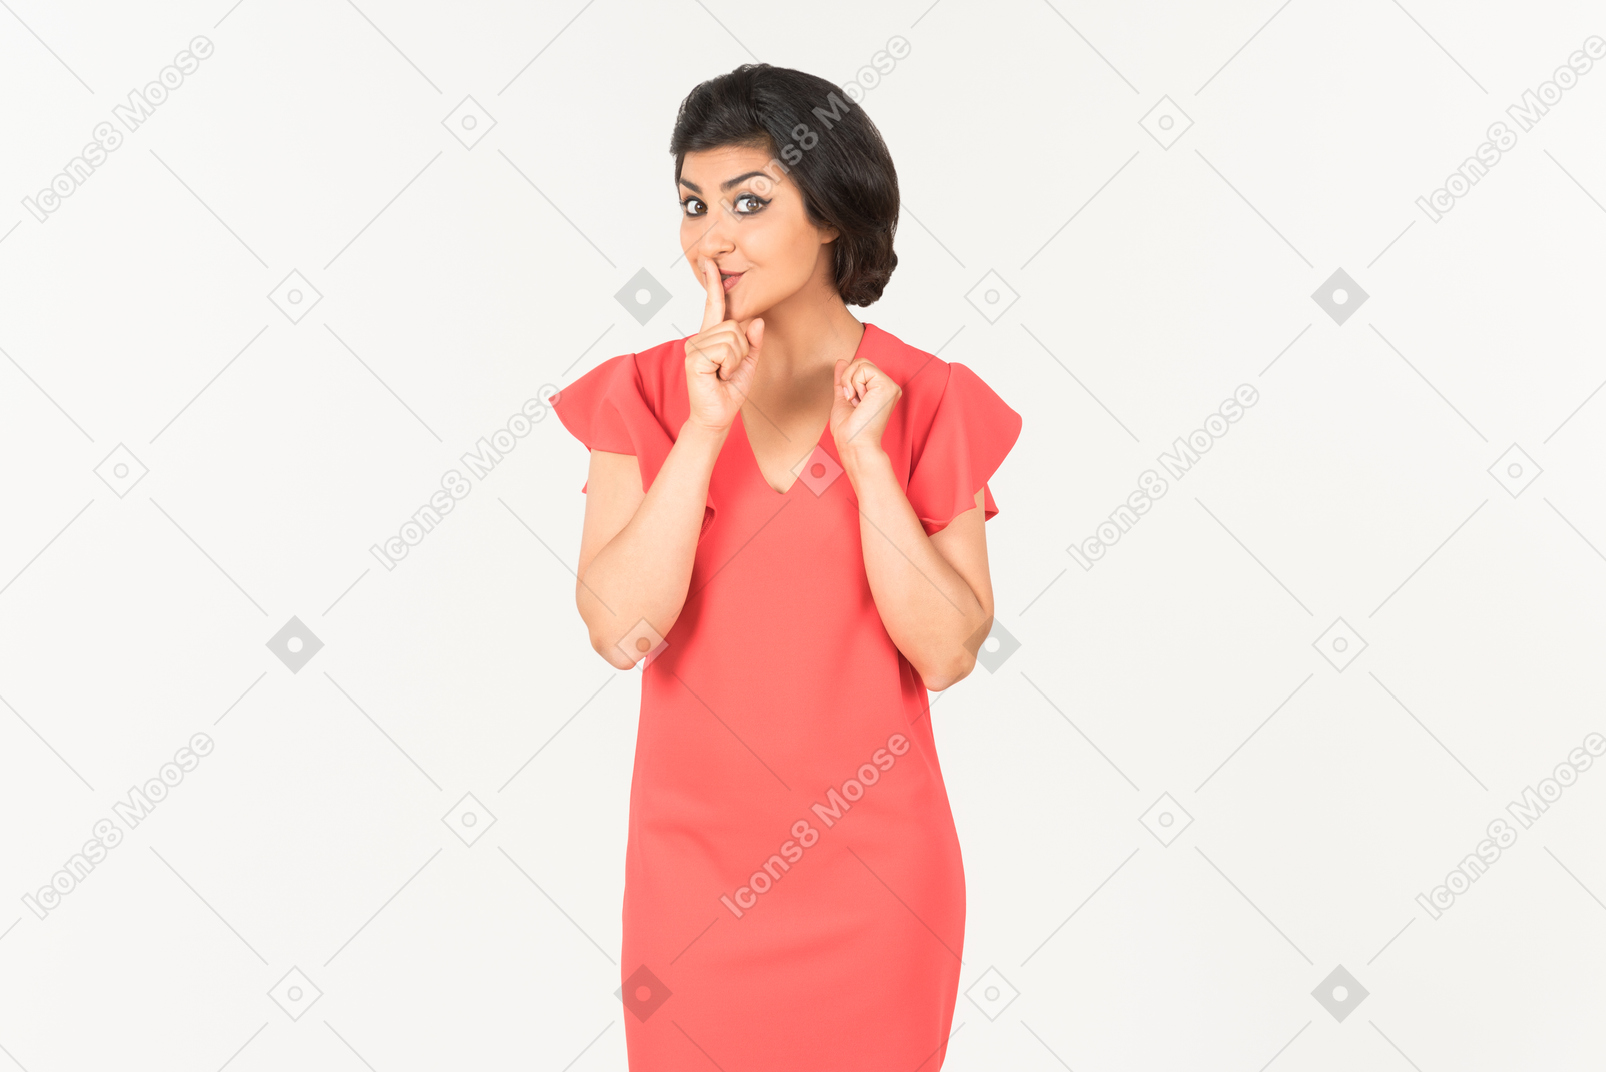 Young indian woman in red dress showing silence sign